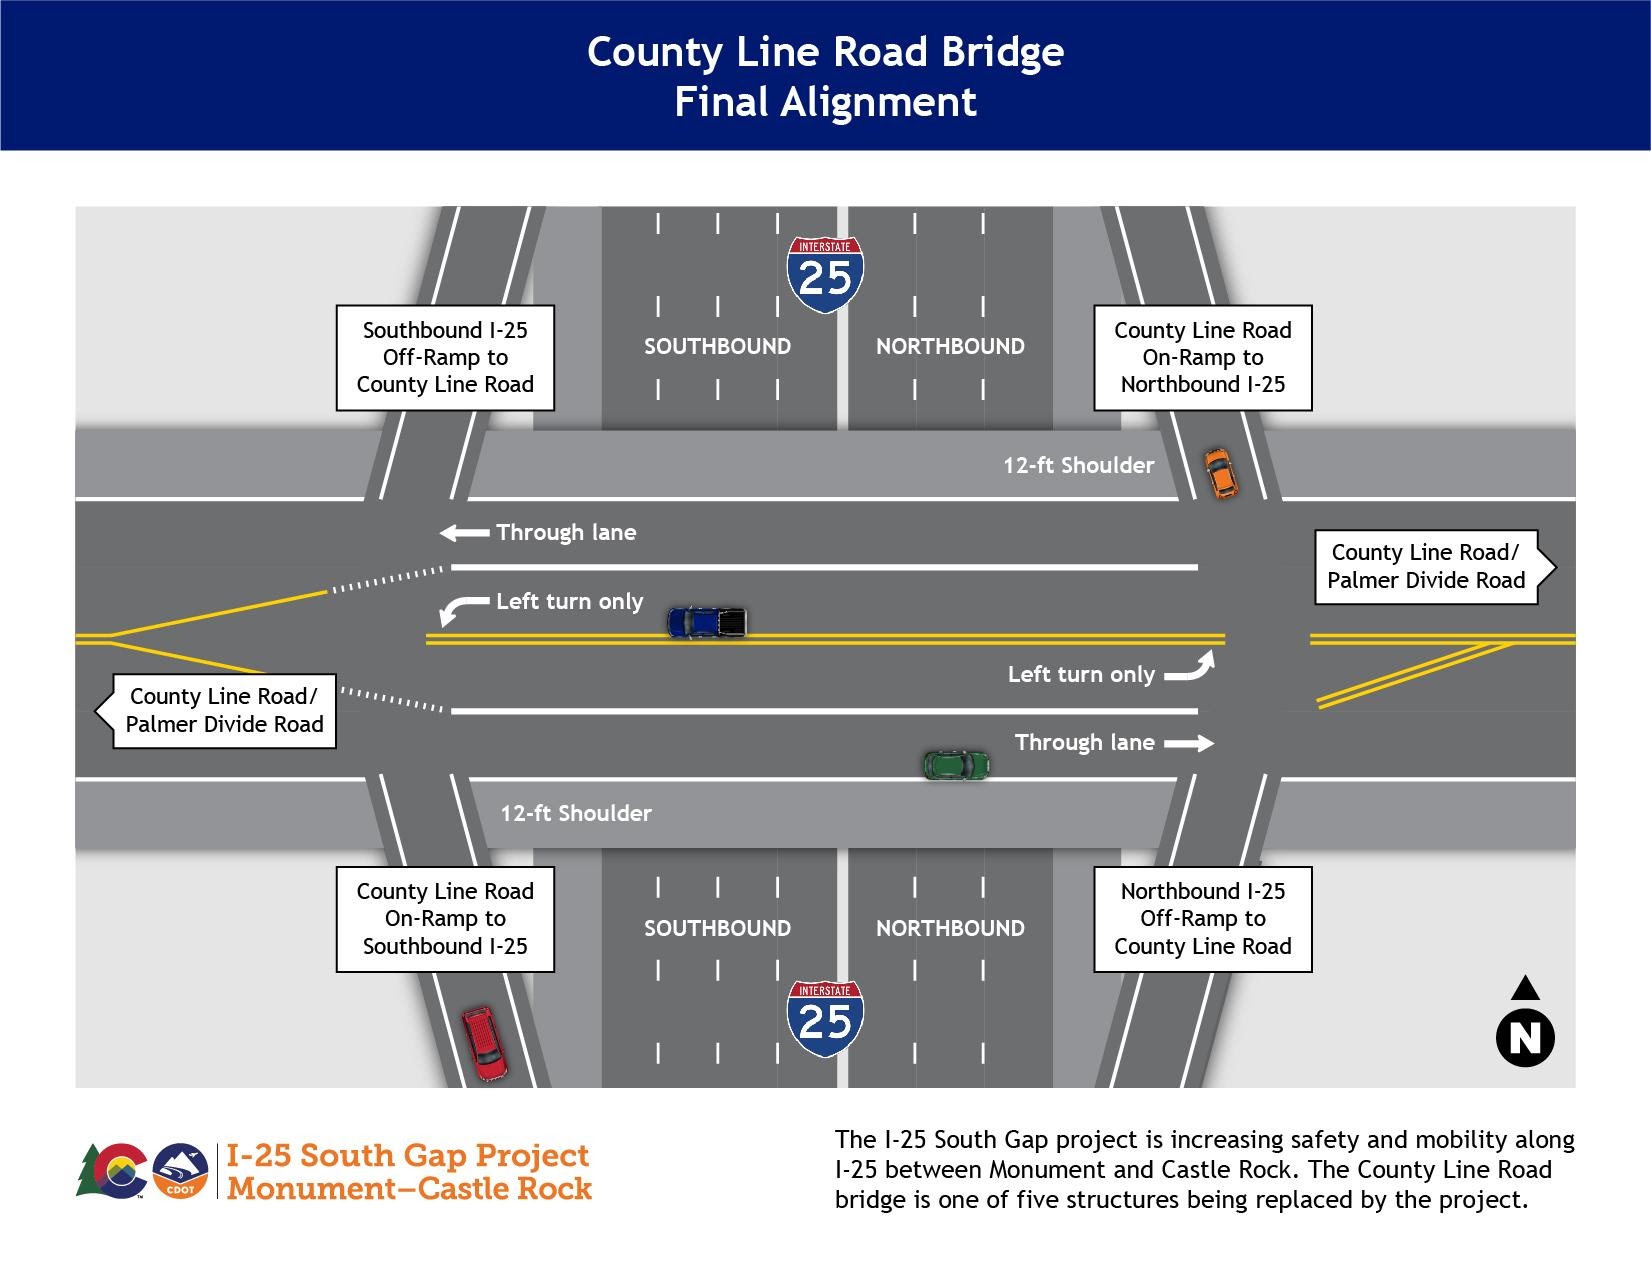 County Line Road Bridge Final Alignment map for the I-25 South Project detail image